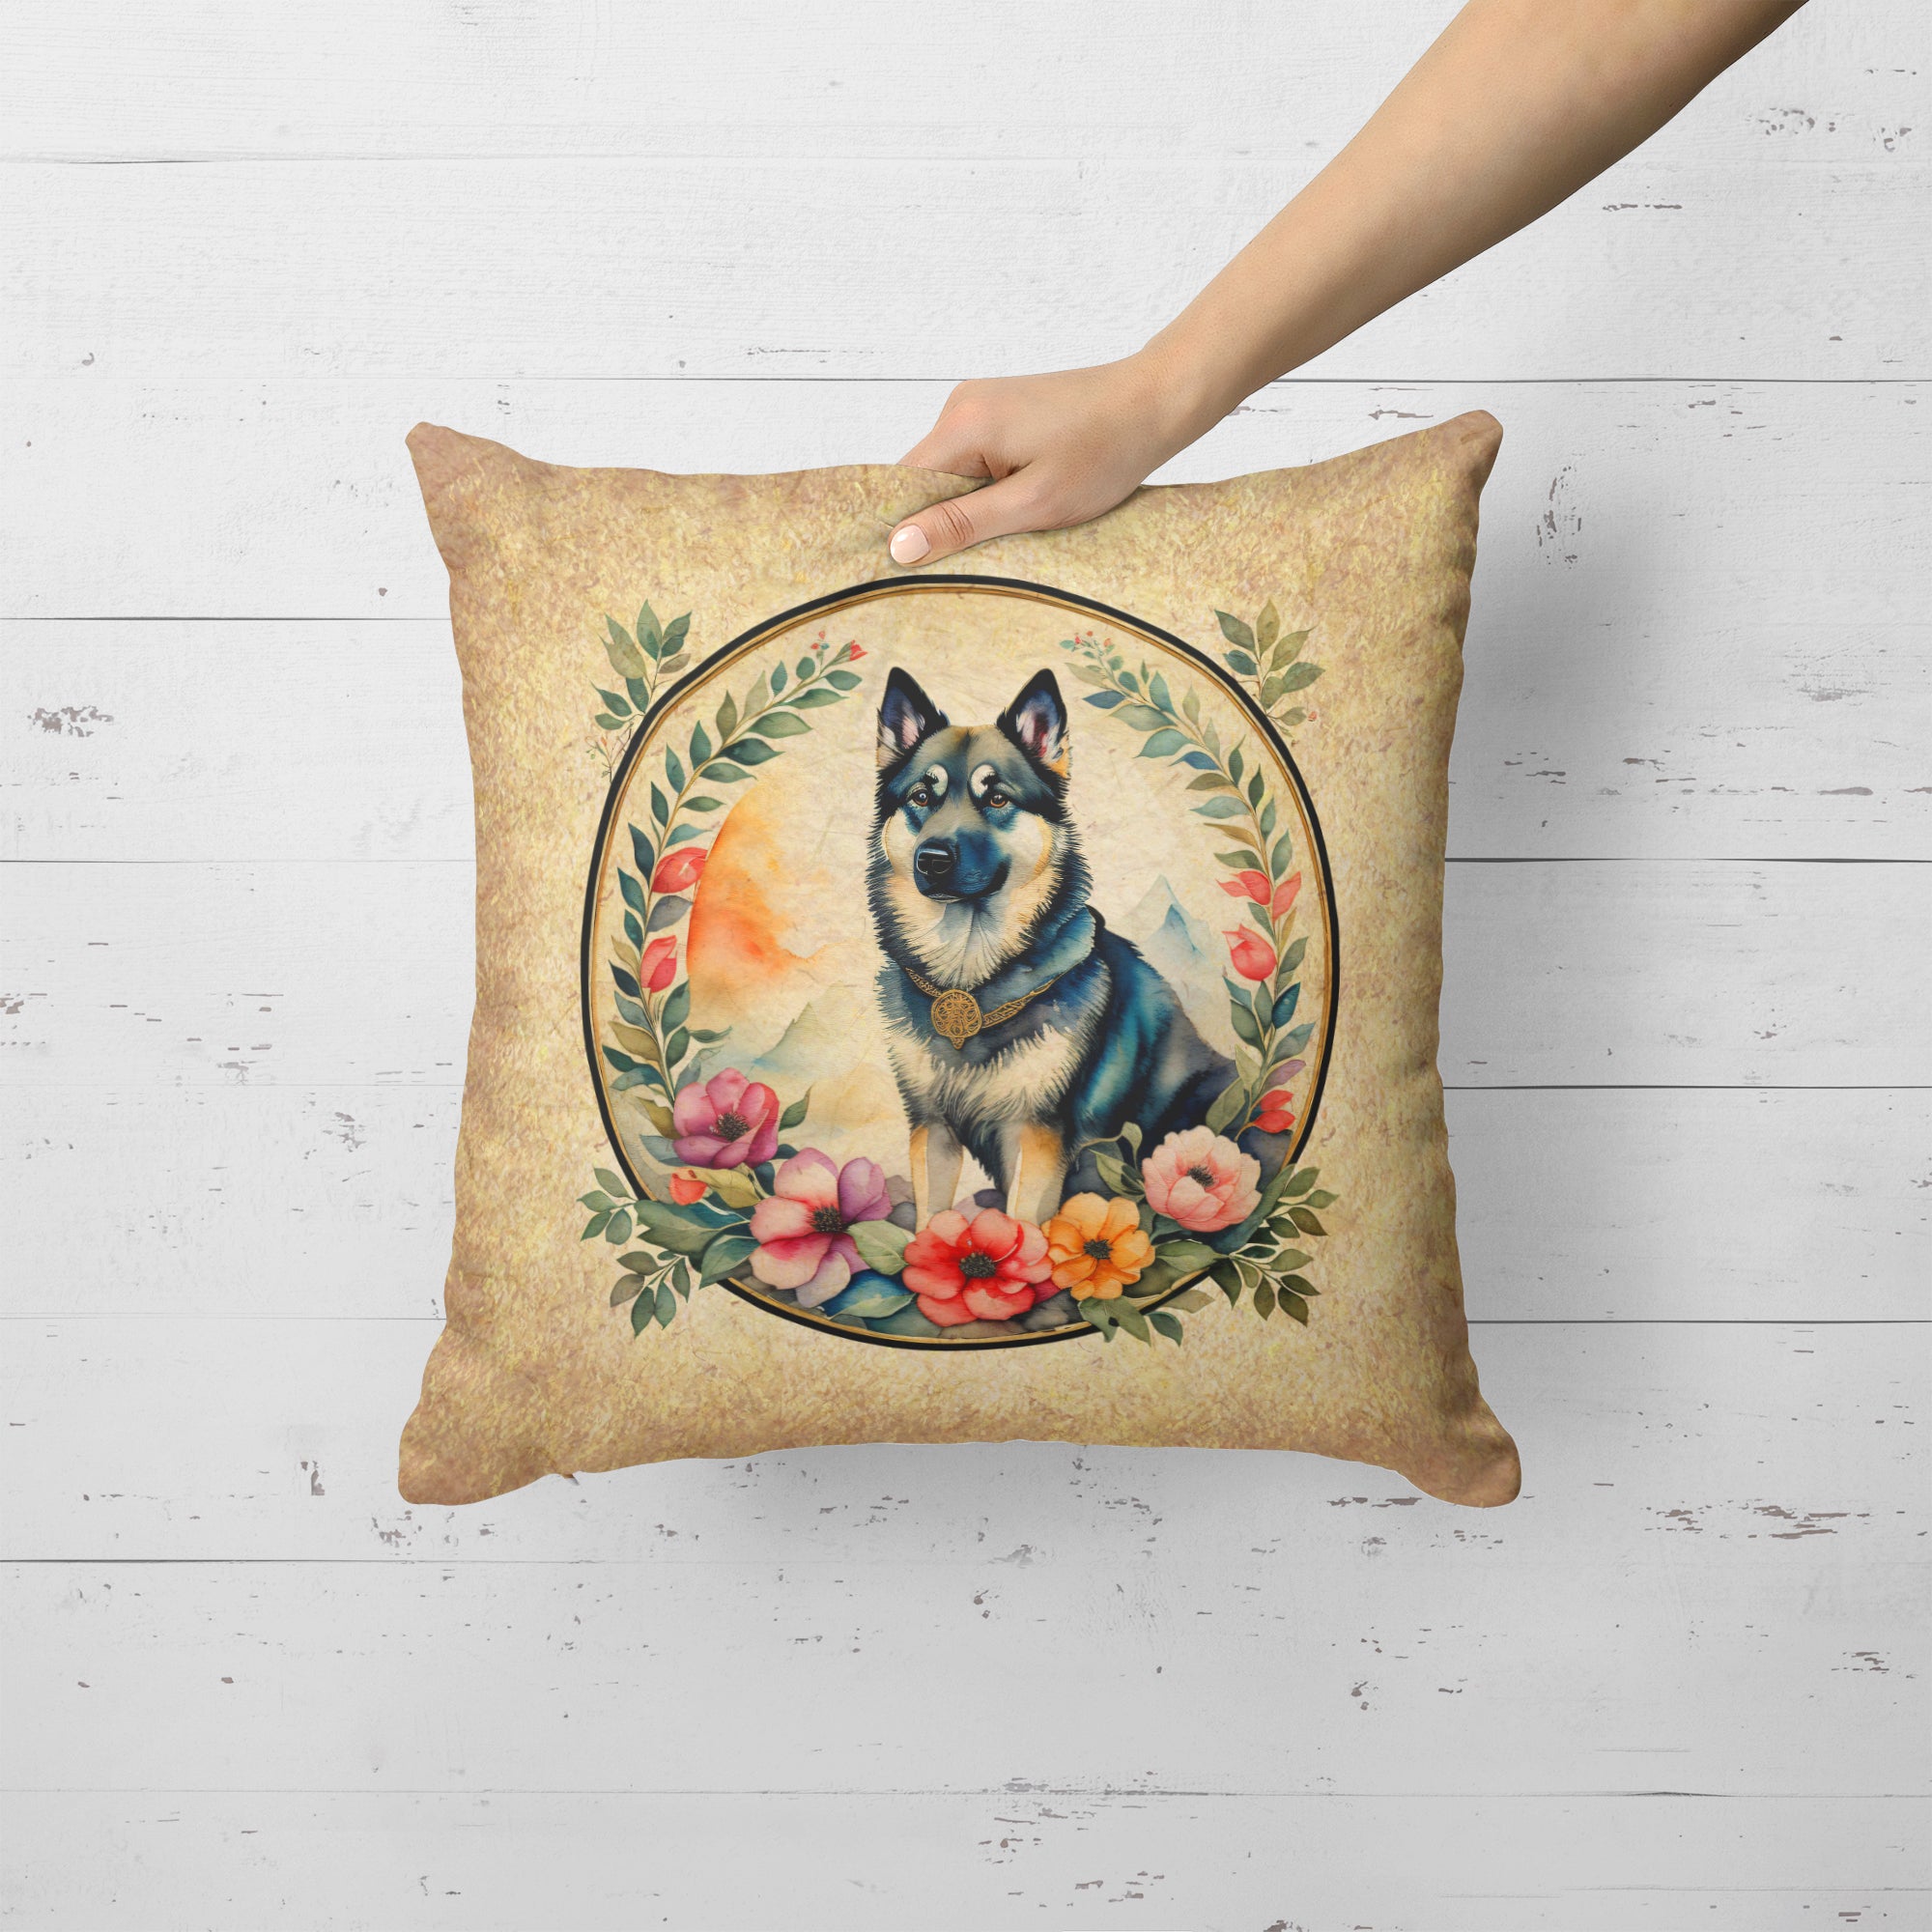 Norwegian Elkhound and Flowers Fabric Decorative Pillow